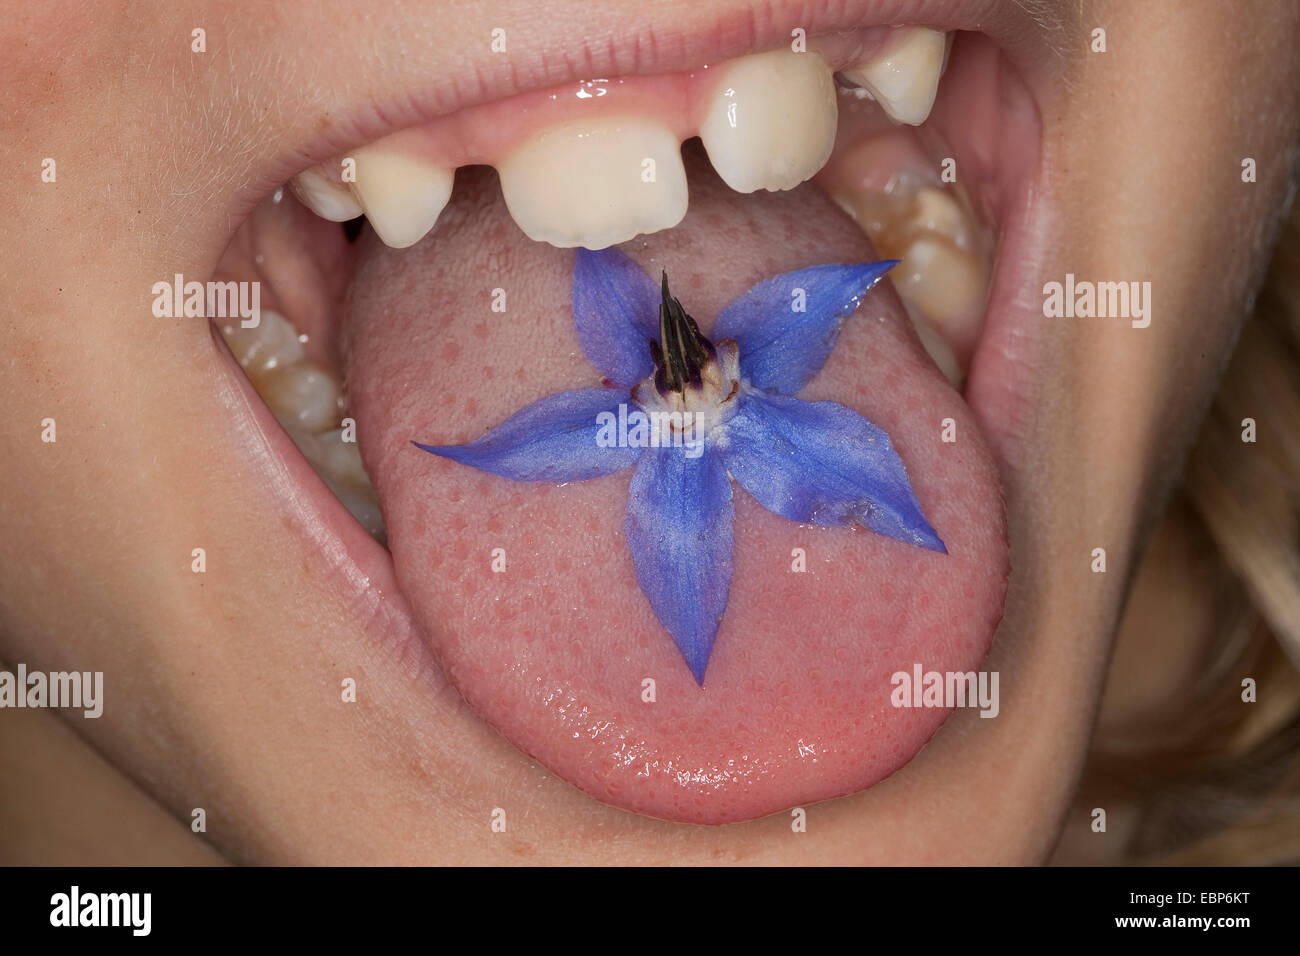 common borage (Borago officinalis), girl with an edible flower on her tongue Stock Photo